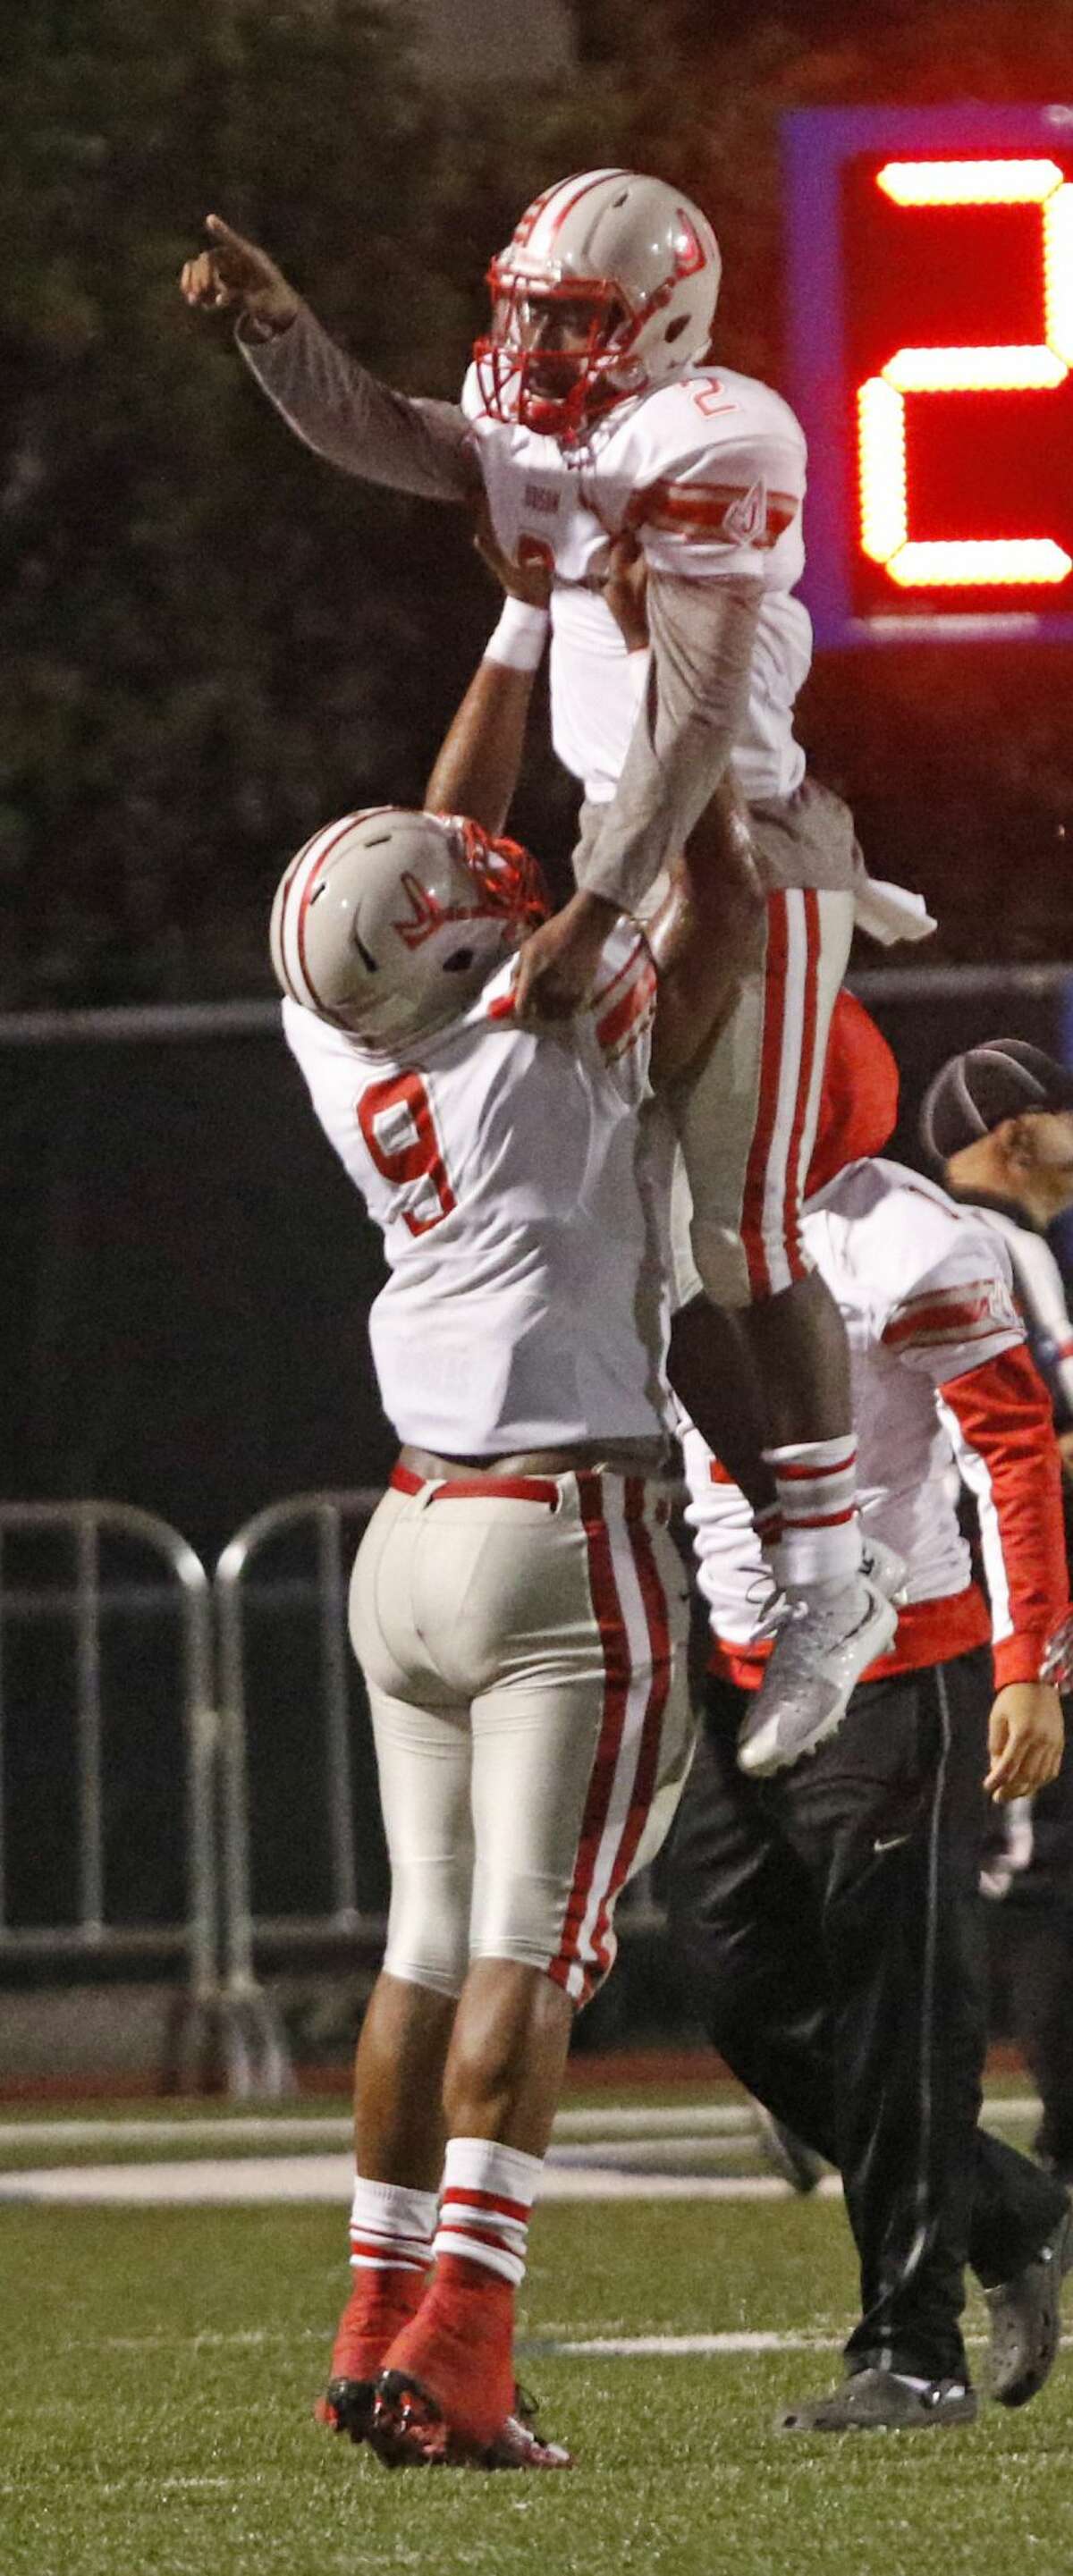 Judson?•s Julon Williams is hoisted by teammate Judson?•s Demarvin Leal after TD from the Class 6A Division I bidistrict high school football playoff game between O'Connor and Judson on November 11,2016 at Farris Stadium.